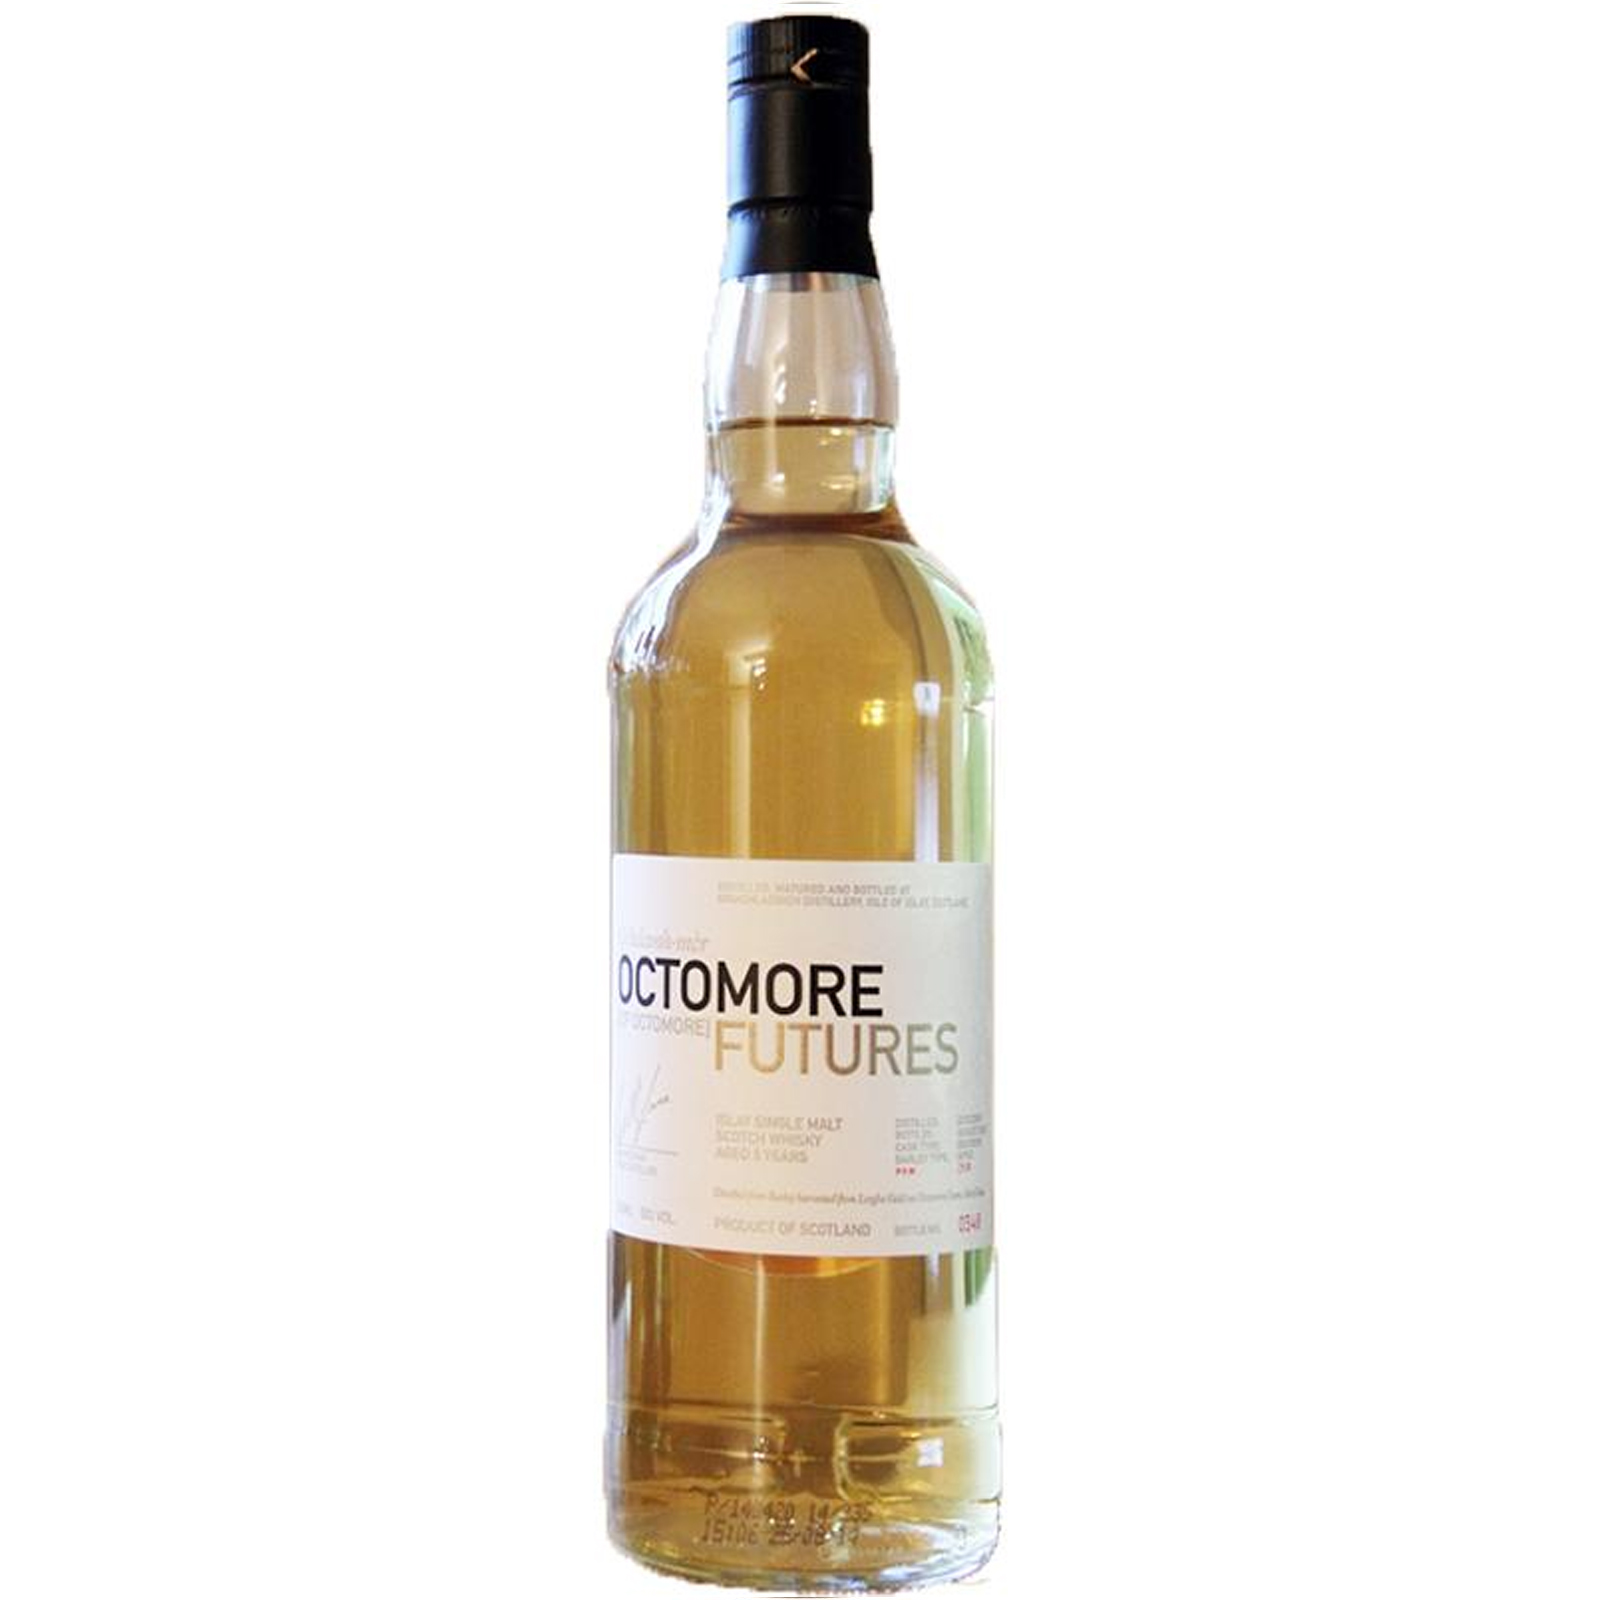 You are currently viewing Octomore 2009 5 years – Futures